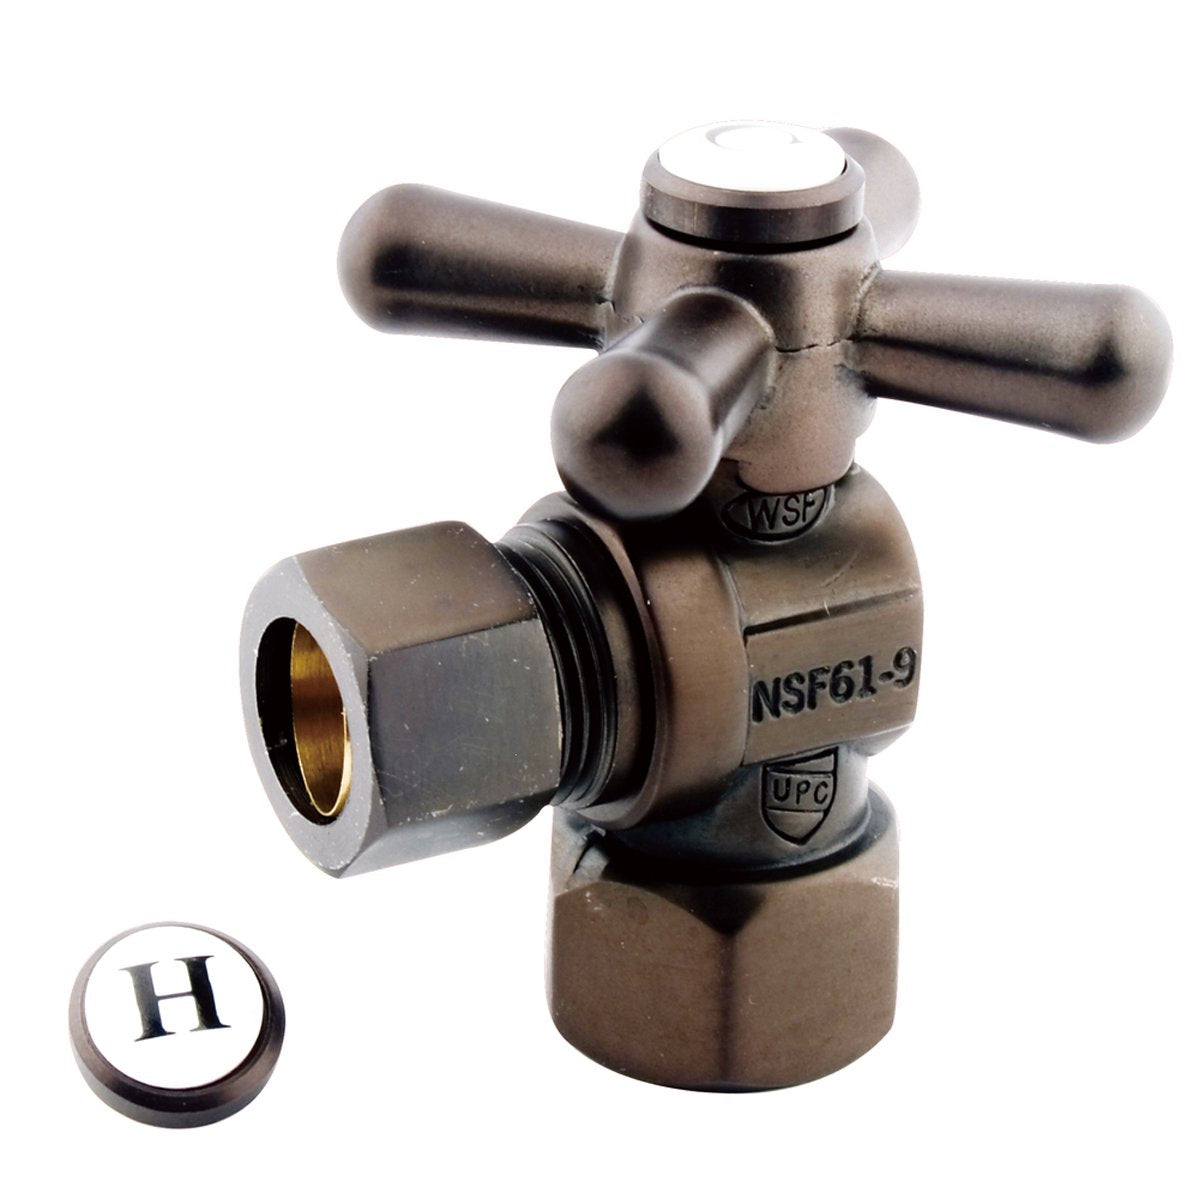 Kingston Brass Vintage Angle Stop with 1/2" IPS x 1/2" OD Compression-Bathroom Accessories-Free Shipping-Directsinks.